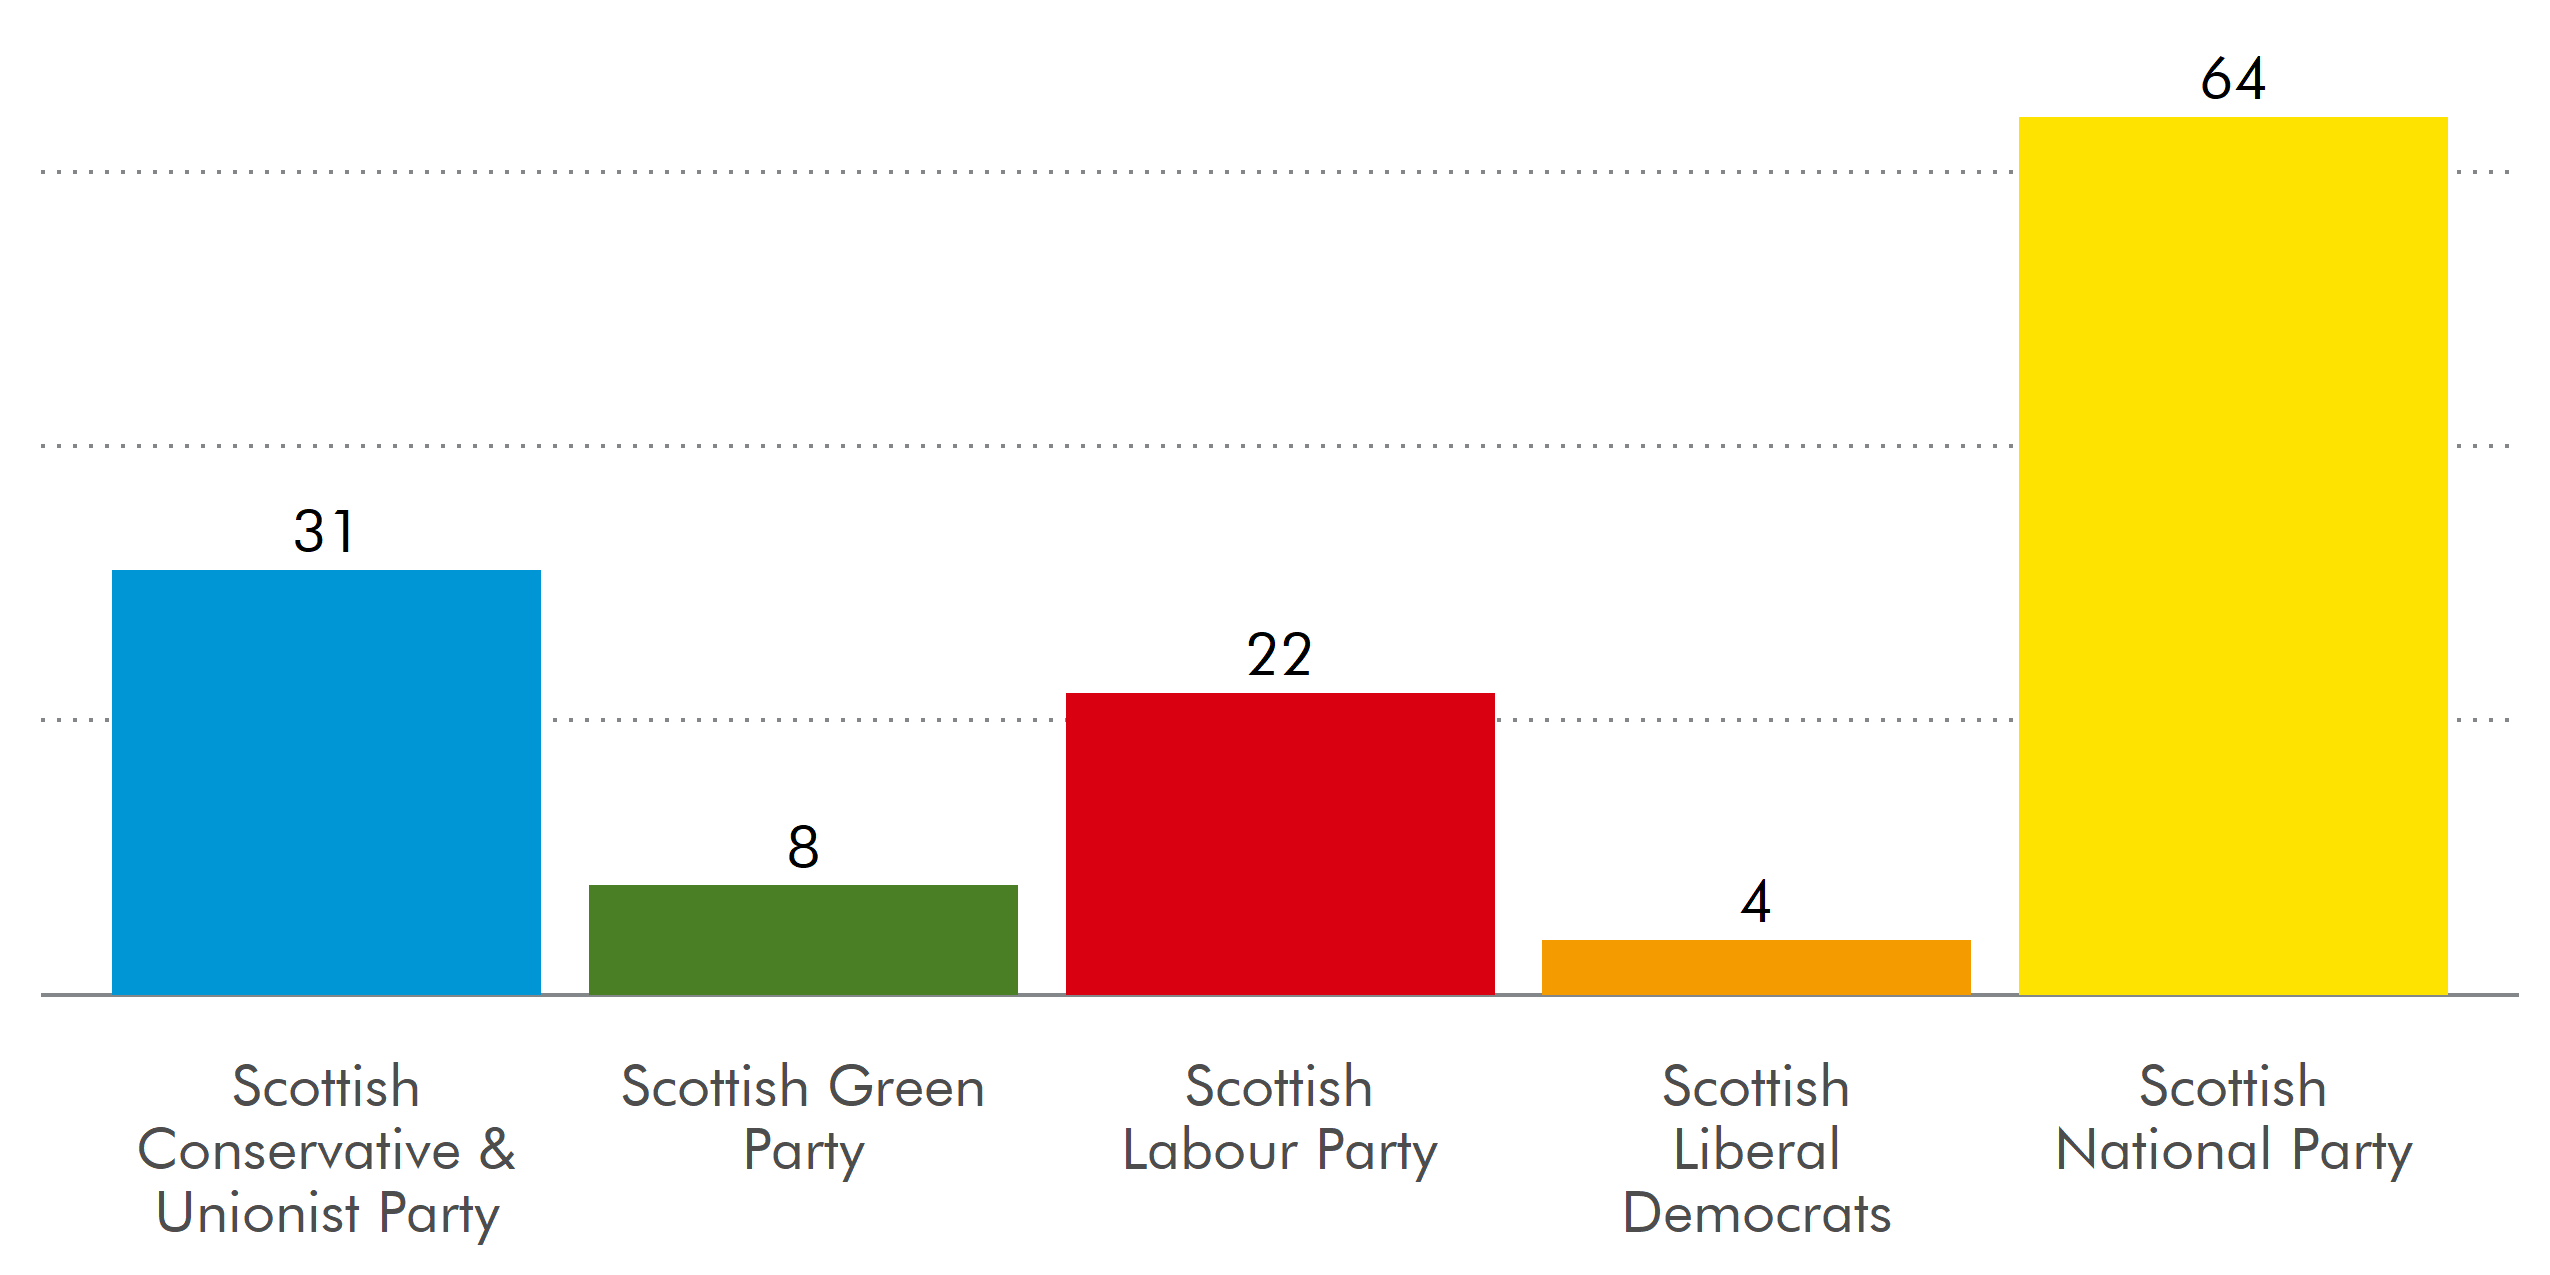 The SNP won the most seats with 64, the Conservative party won 31, Labour won 22, the Green party 8 and the Liberal Democrats 4.